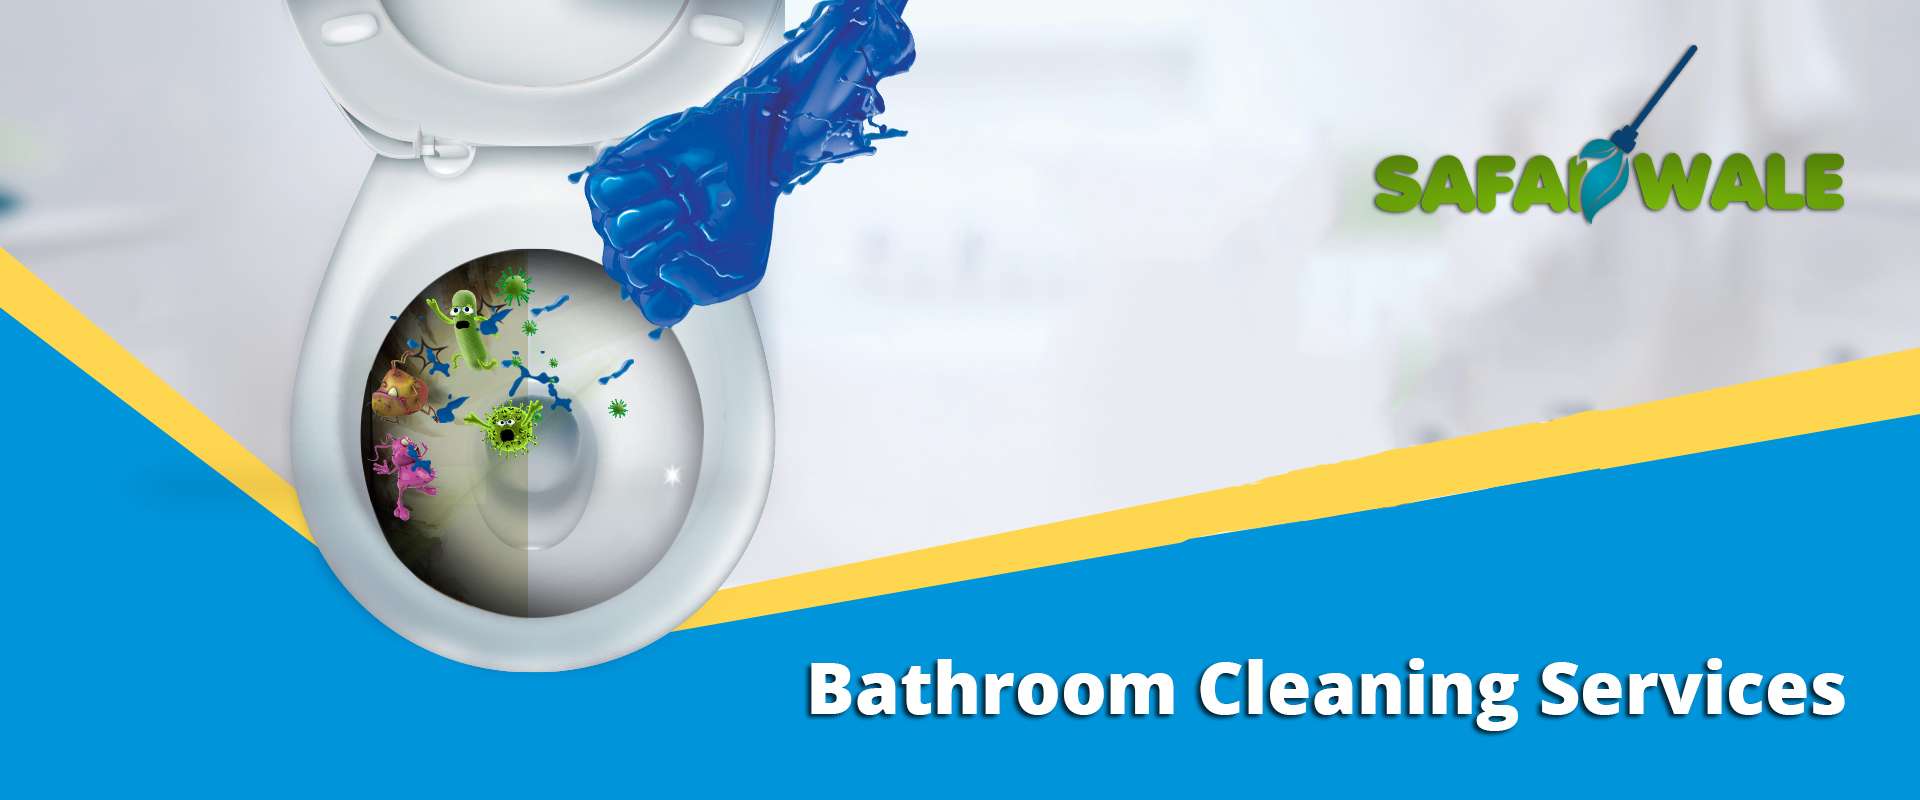 bathroom cleaning services near me